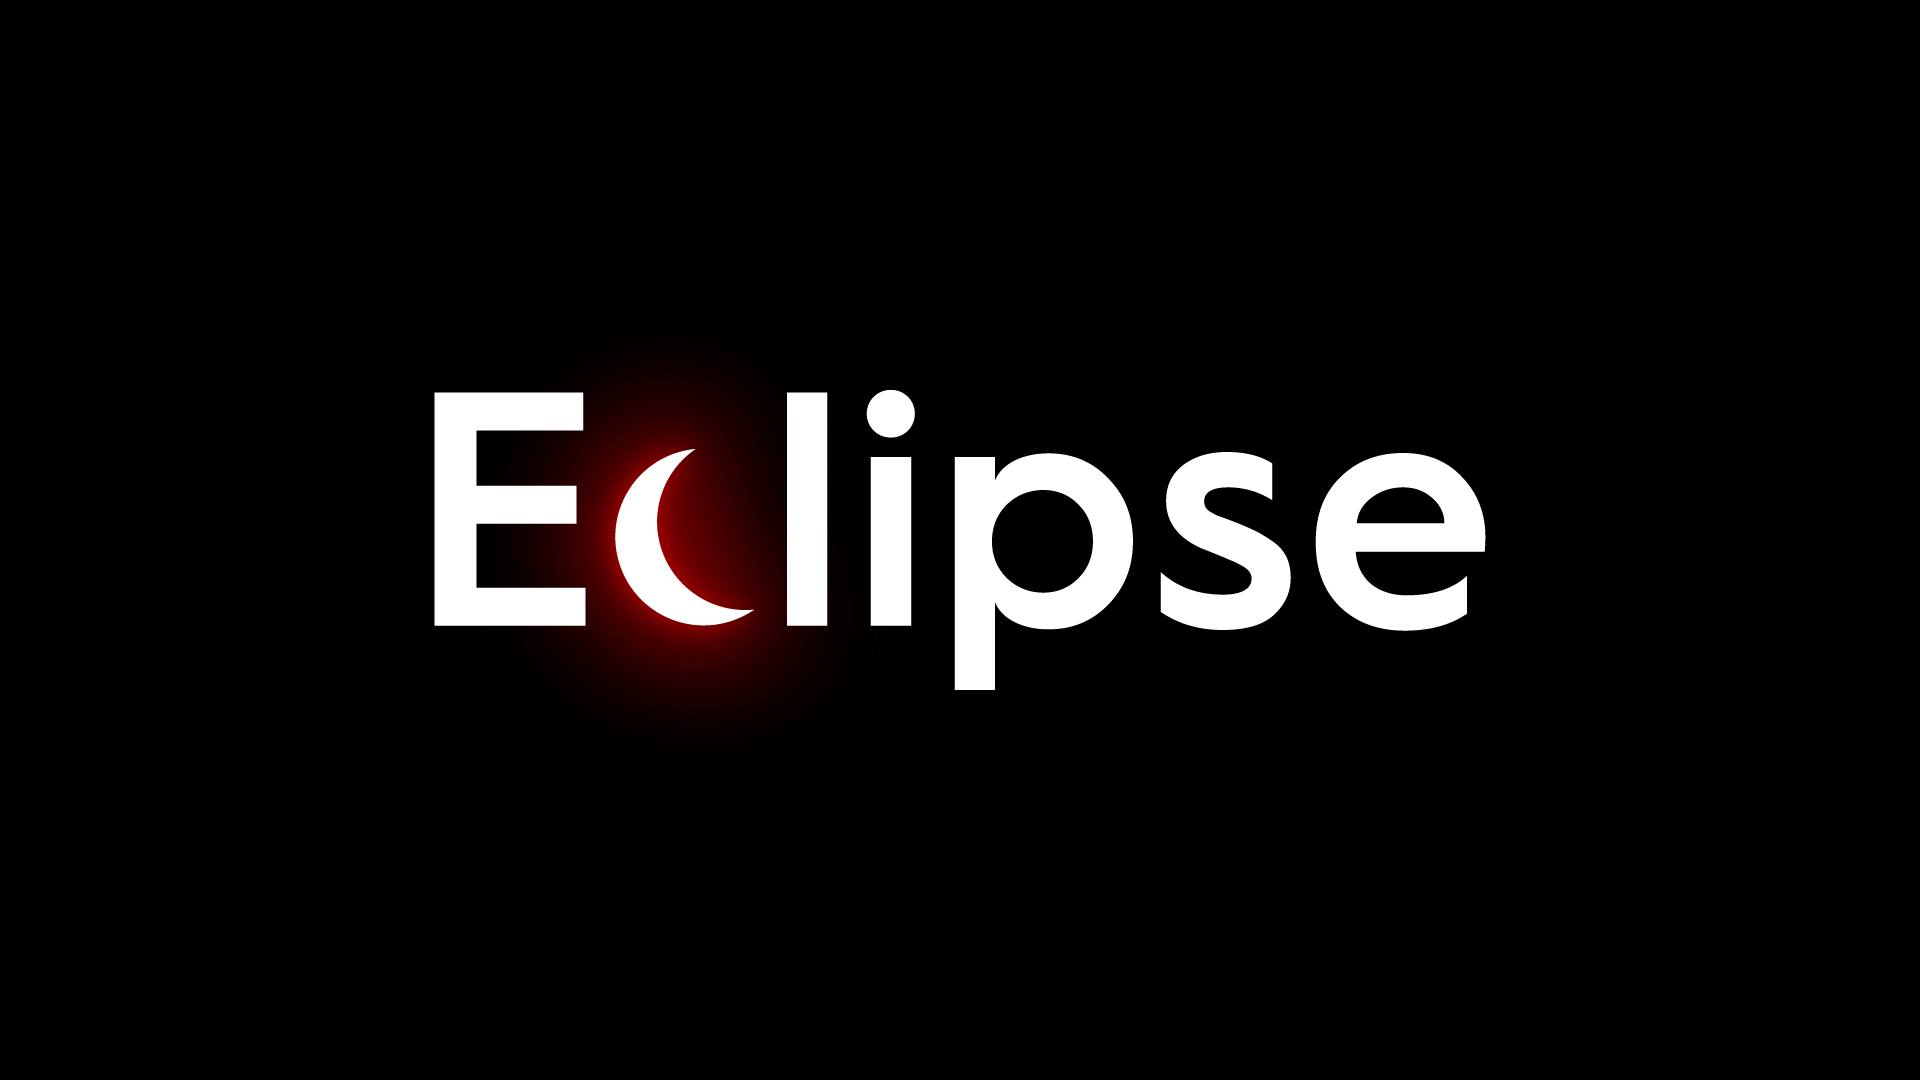 Solar Eclipse Logo - Eclipse logo with the letter 